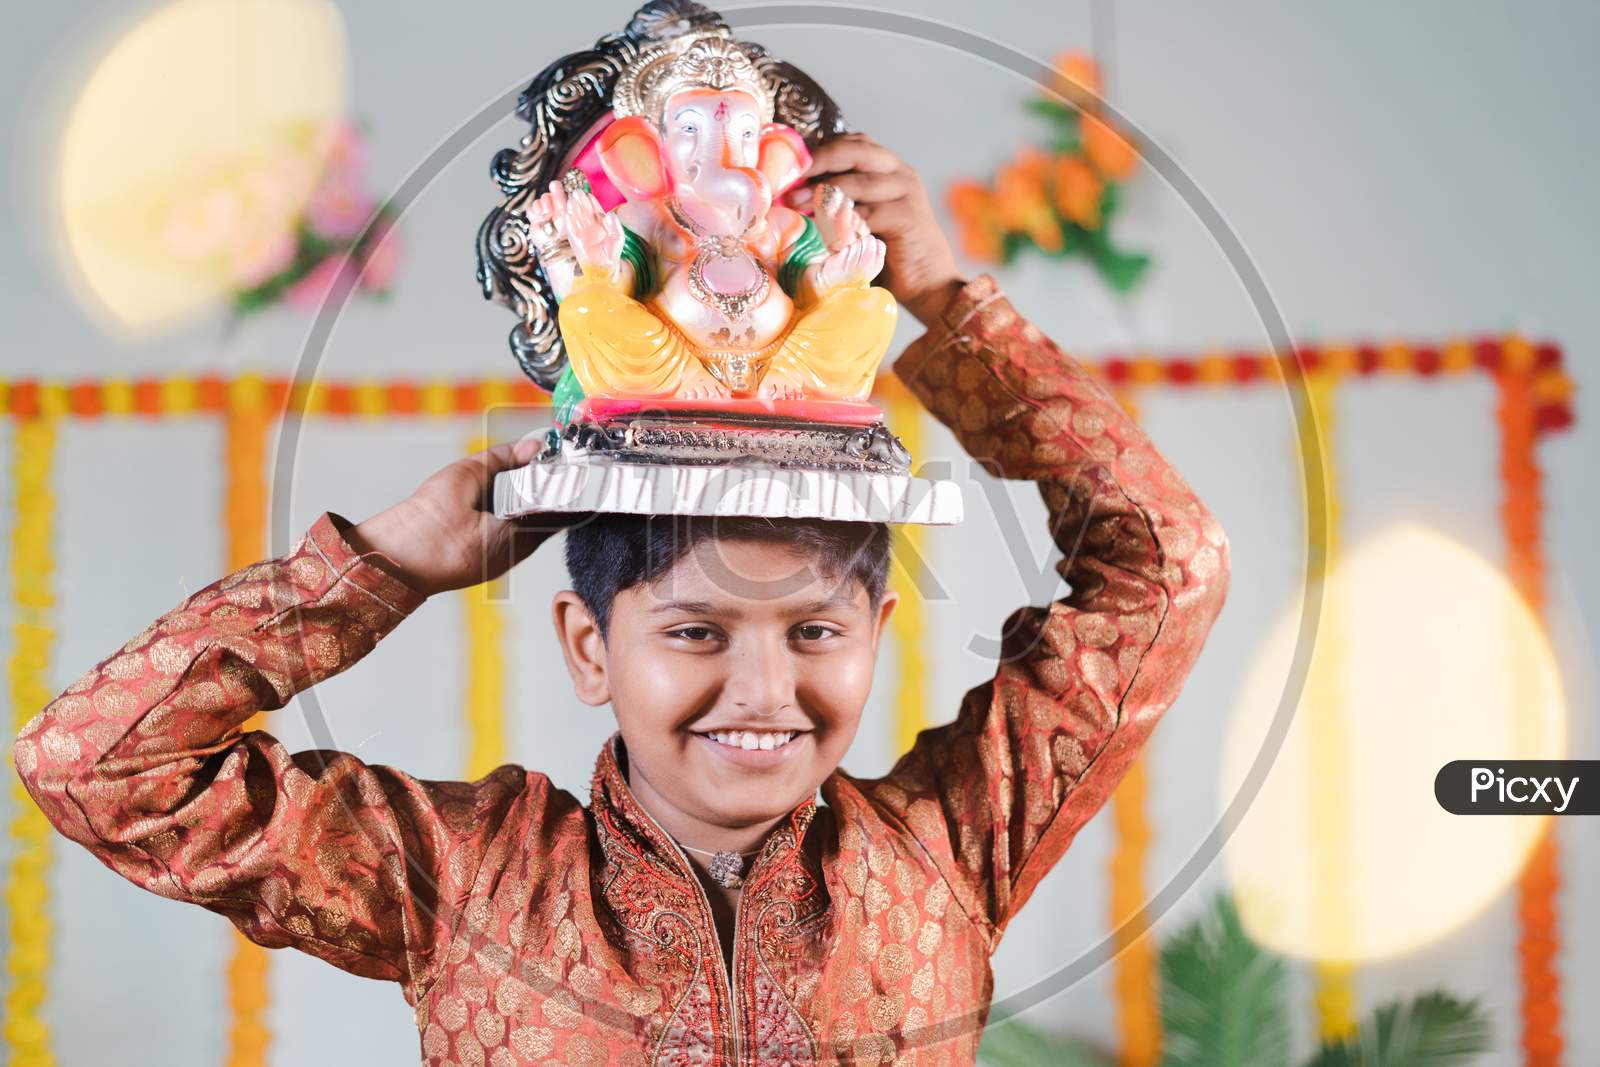 Happy Smiling Kid During Ganesha Festival With Traditional Dress Carrying Lord Vinayaka For Visarjan Or Immersion During Religious Celebration